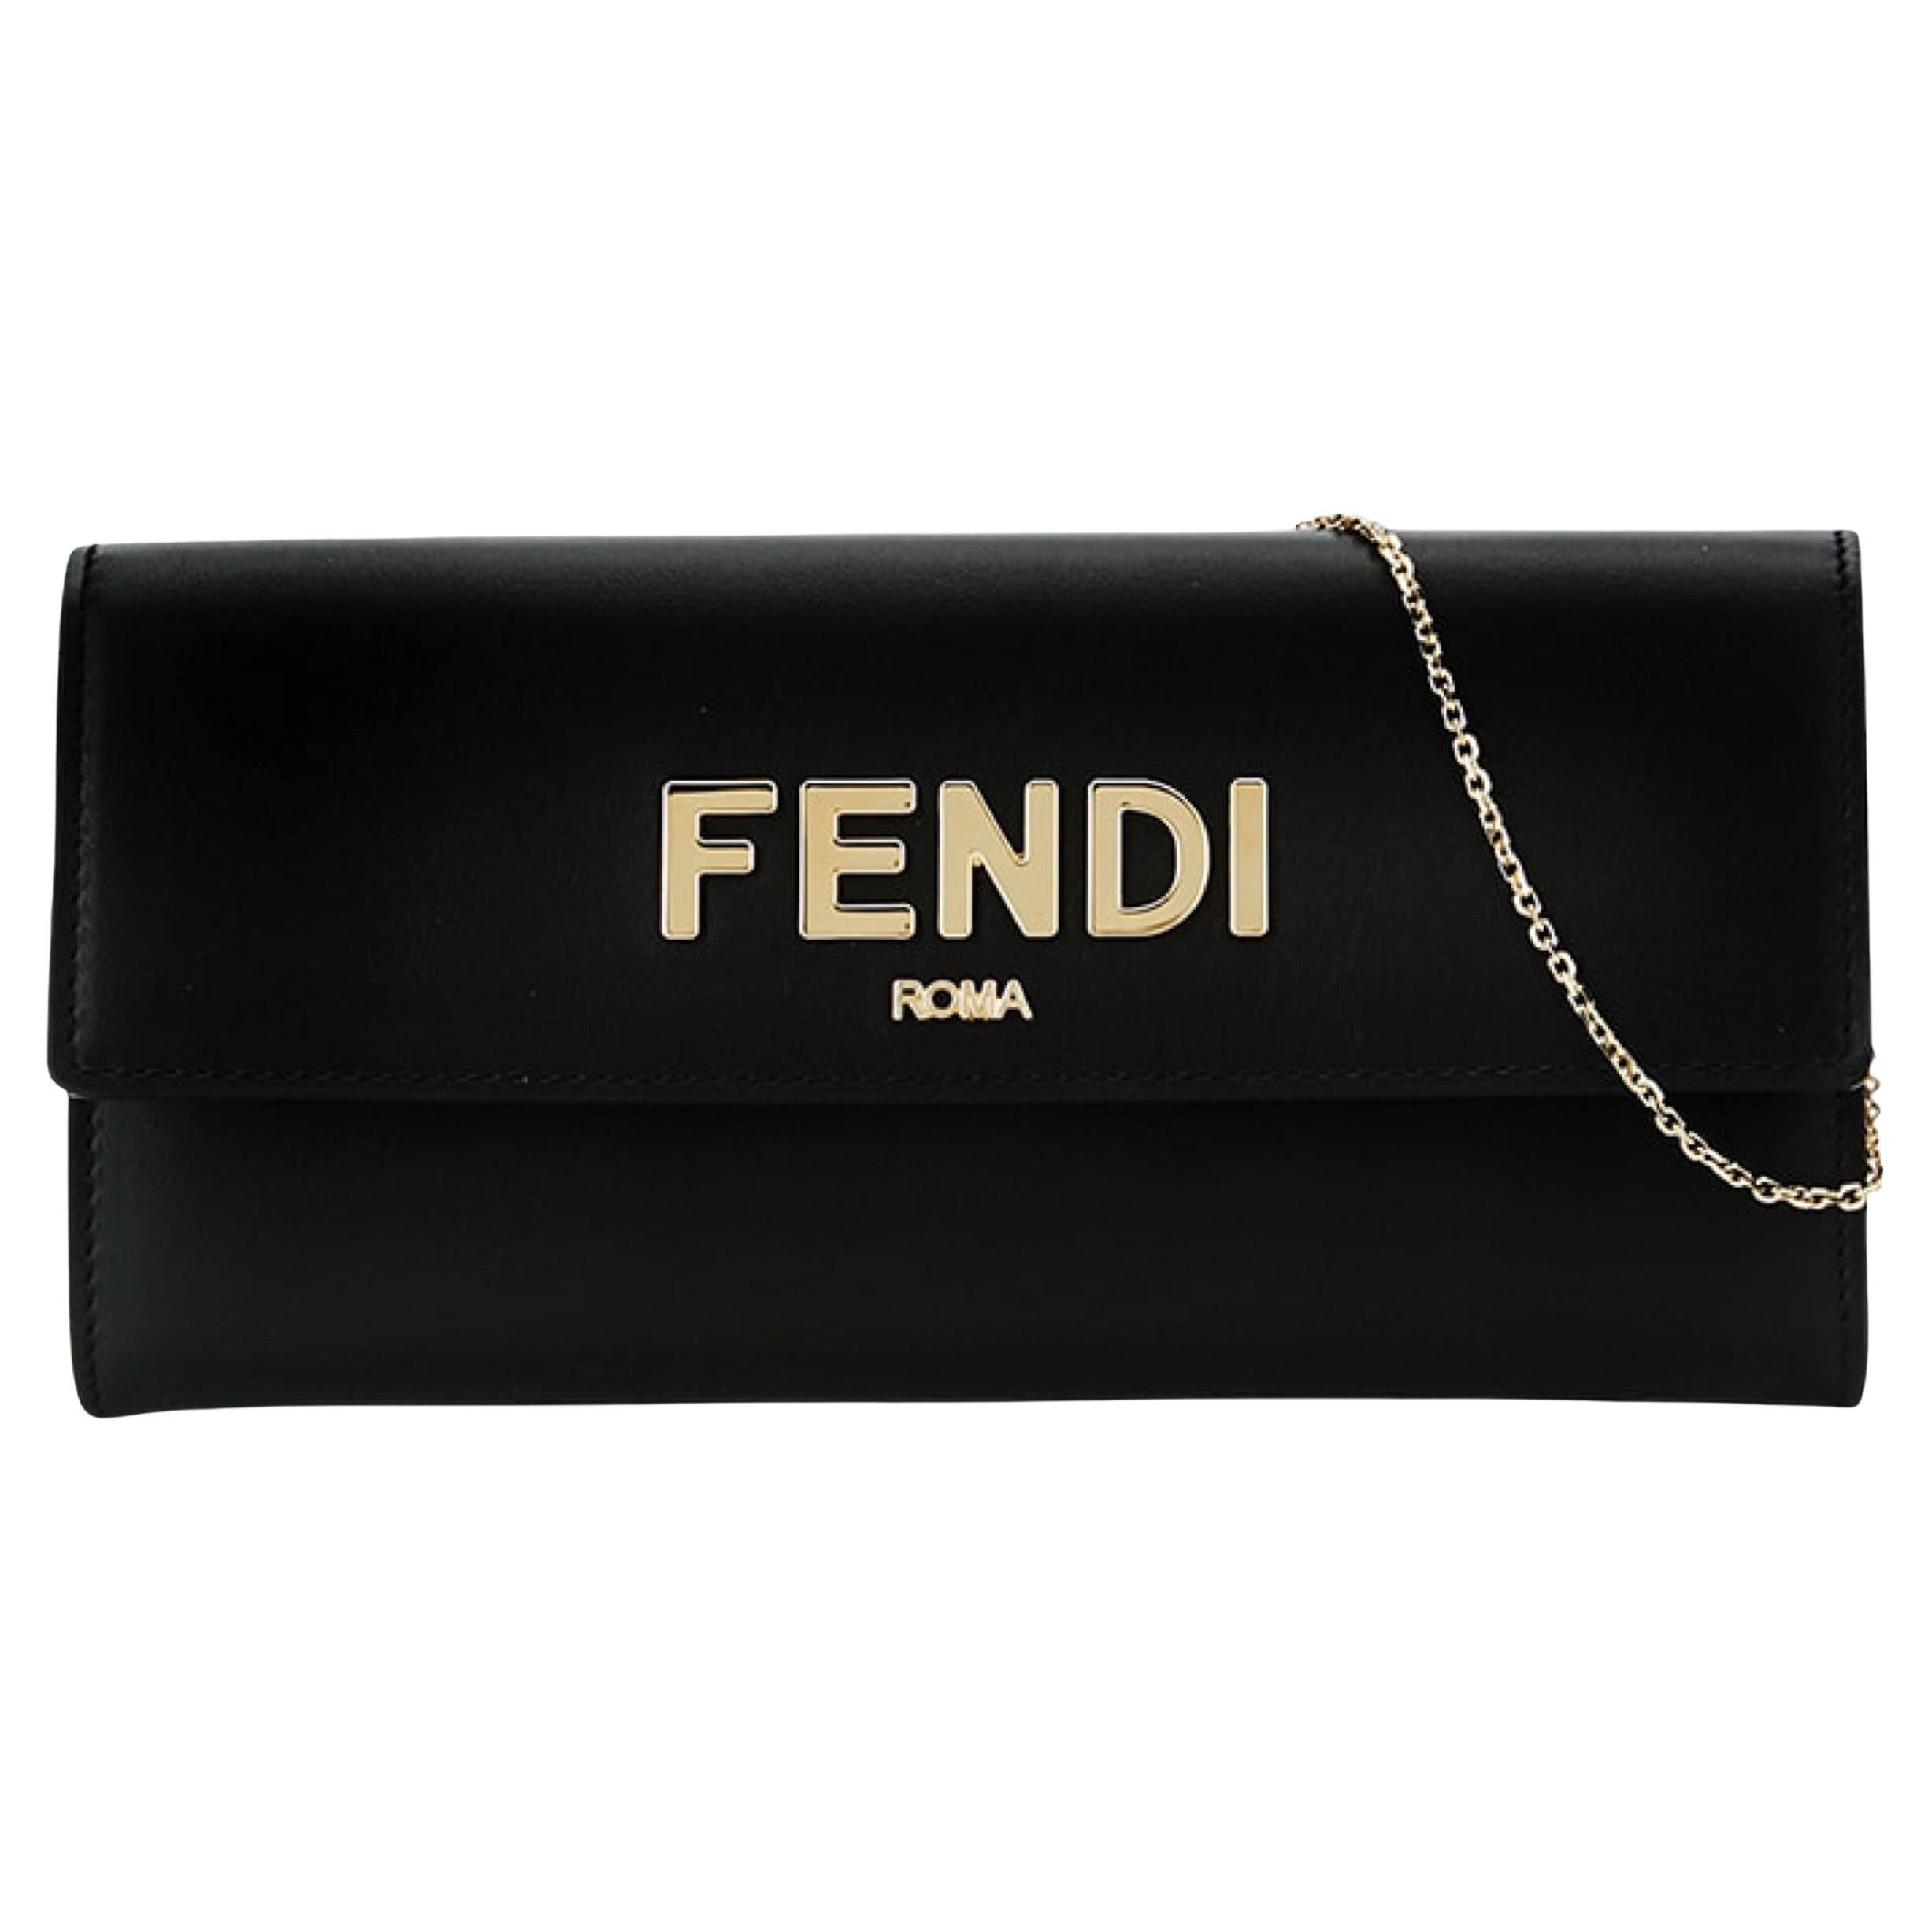 NEW Fendi Black Roma Leather Continental Wallet Clutch Crossbody Bag For Sale